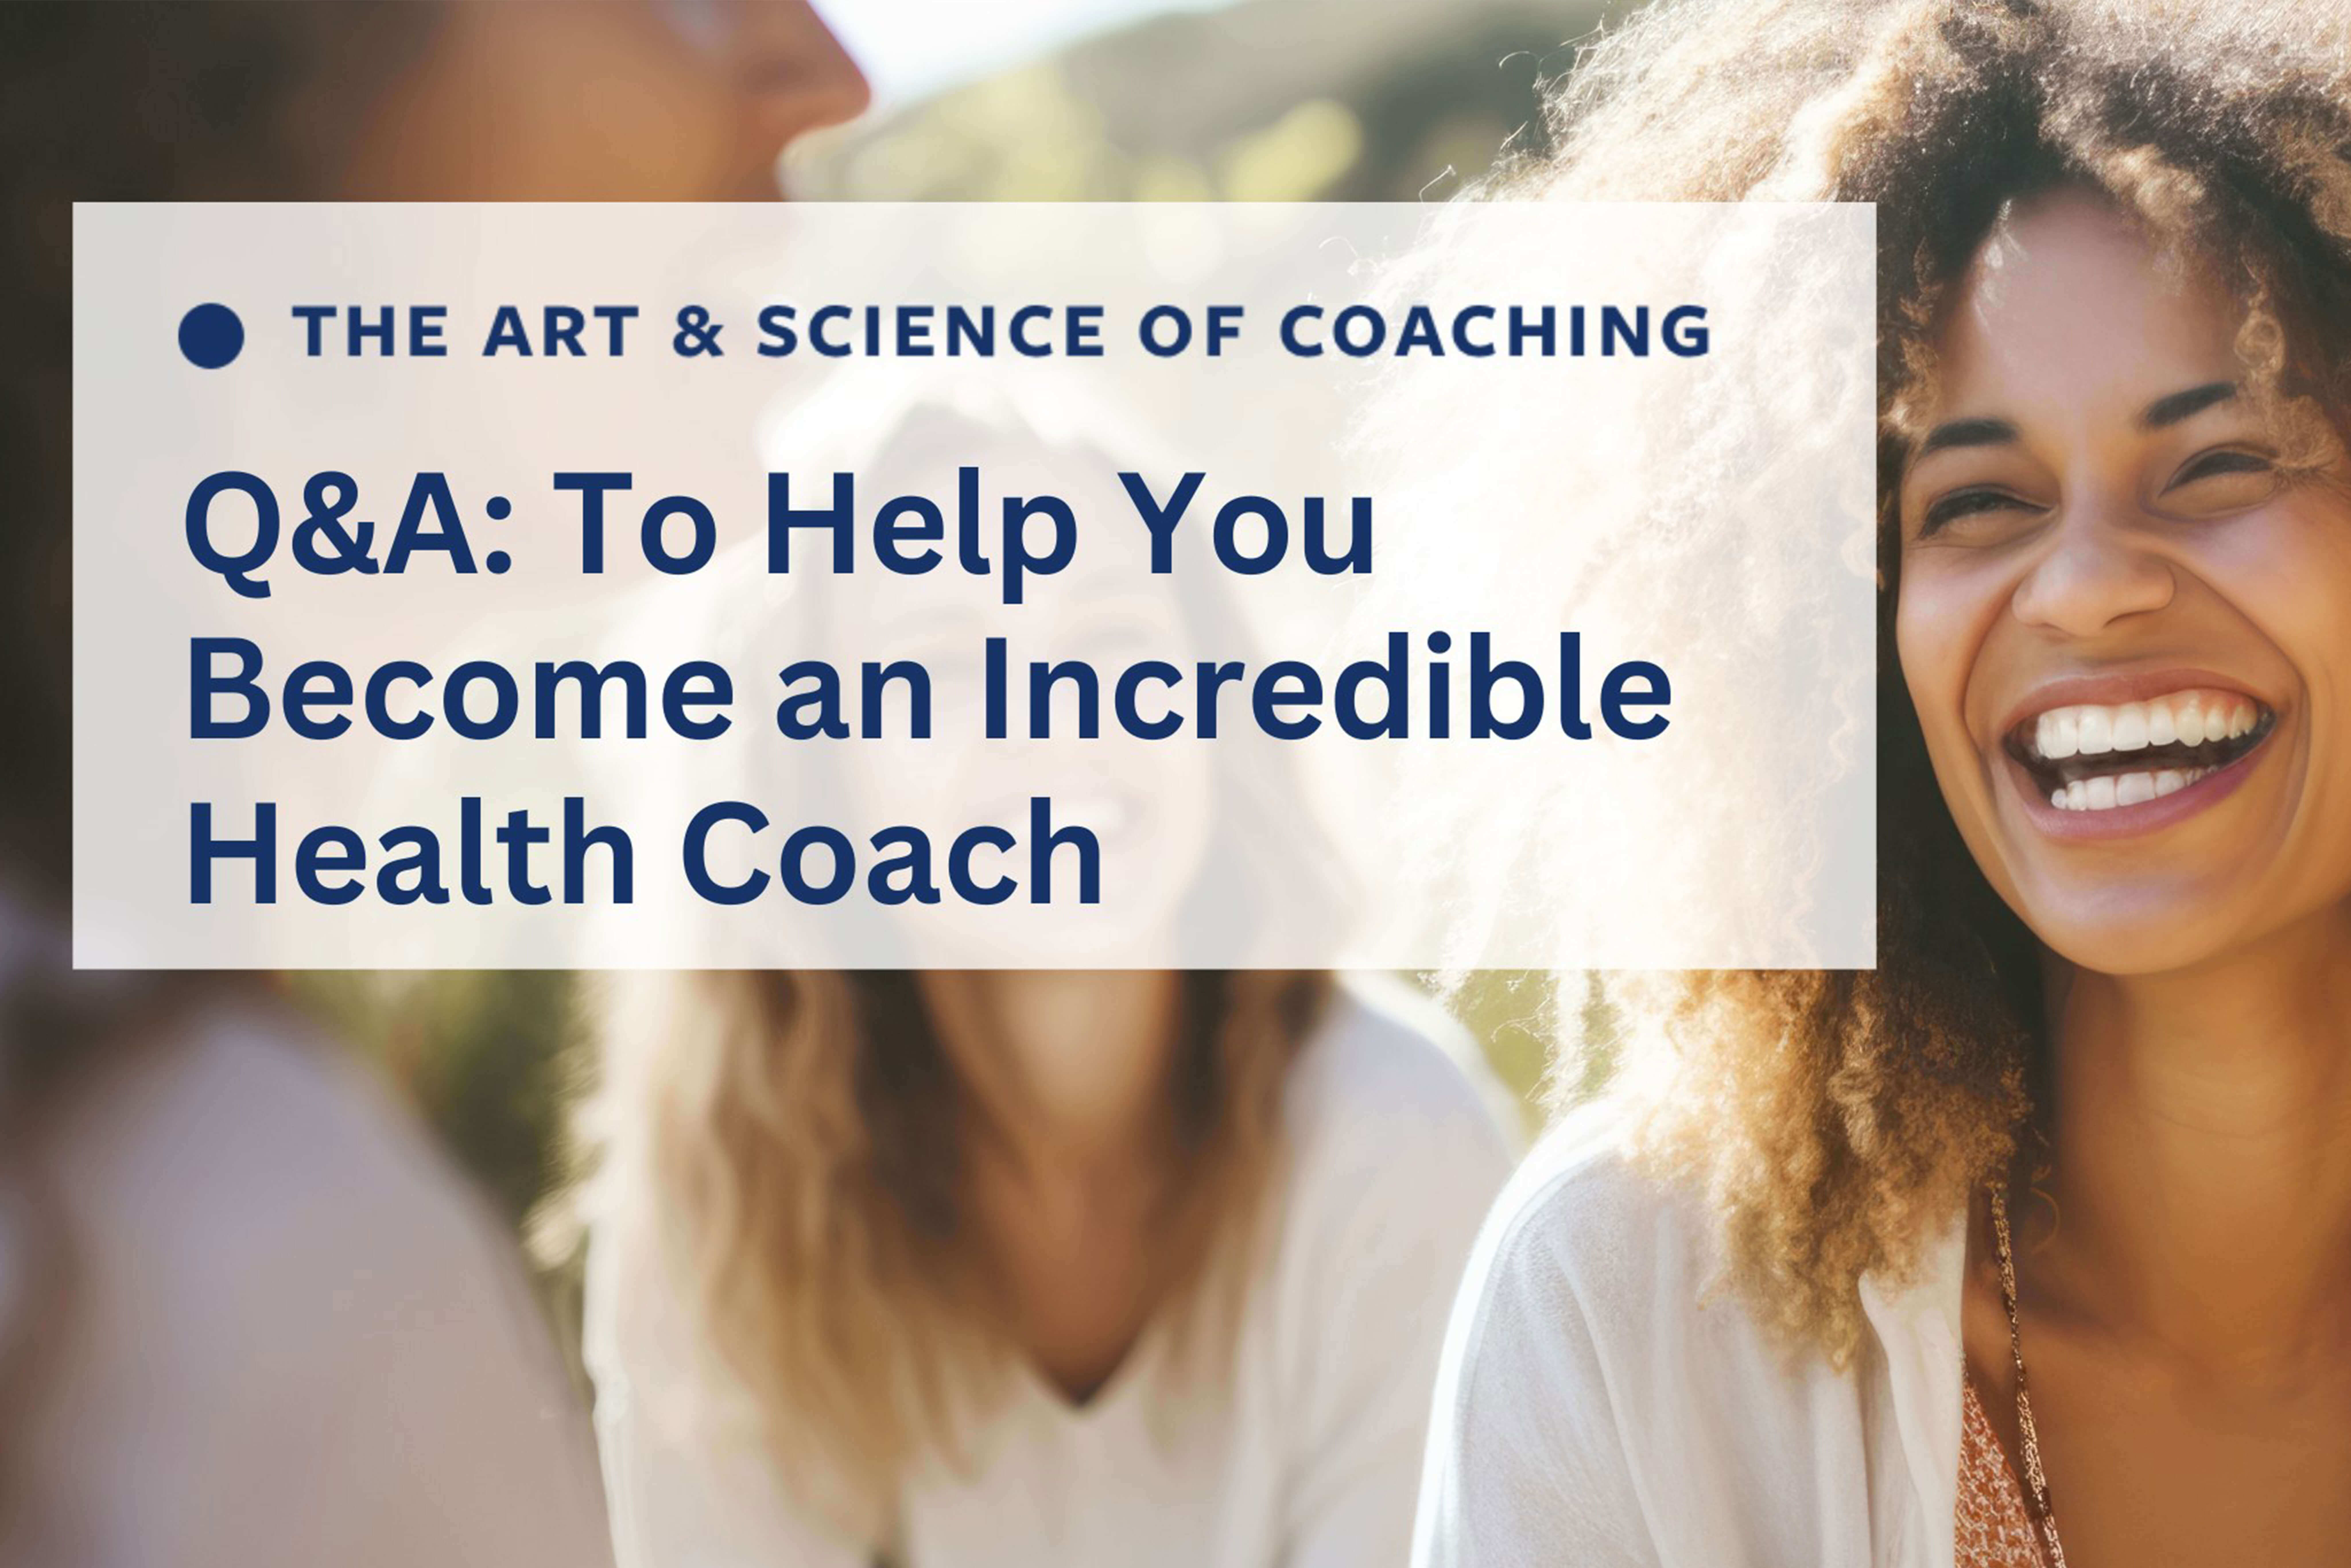 Are you ready to become an incredible health coach?